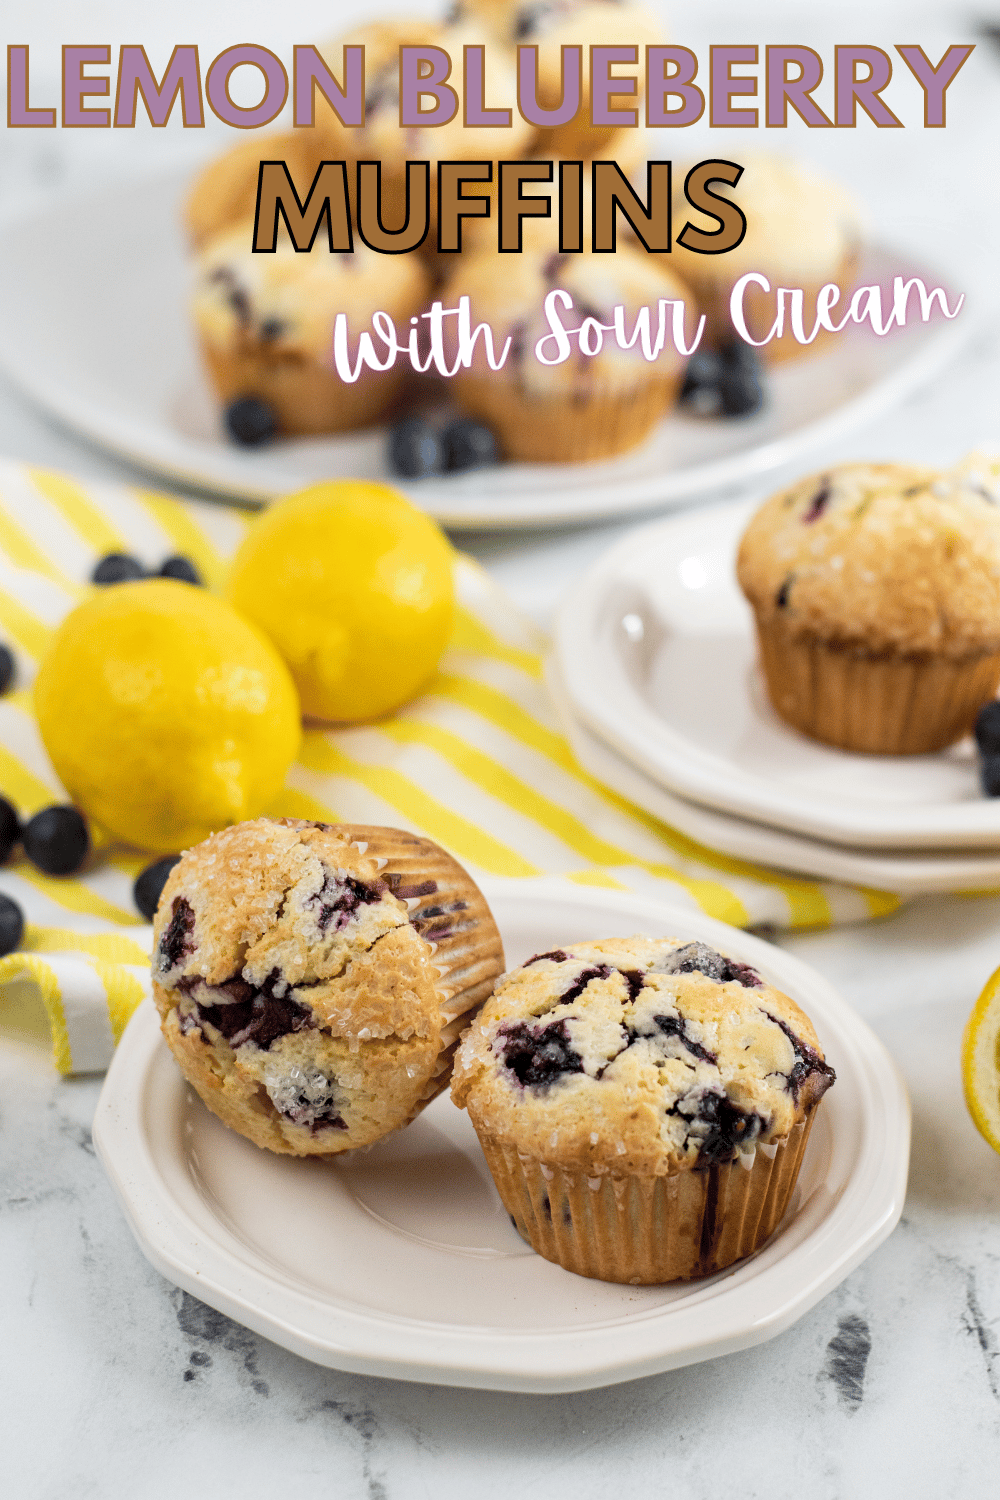 Lemon Blueberry Muffins With Sour Cream on several plates surrounded by blueberries and lemons with title text reading Lemon Blueberry Muffins With Sour Cream